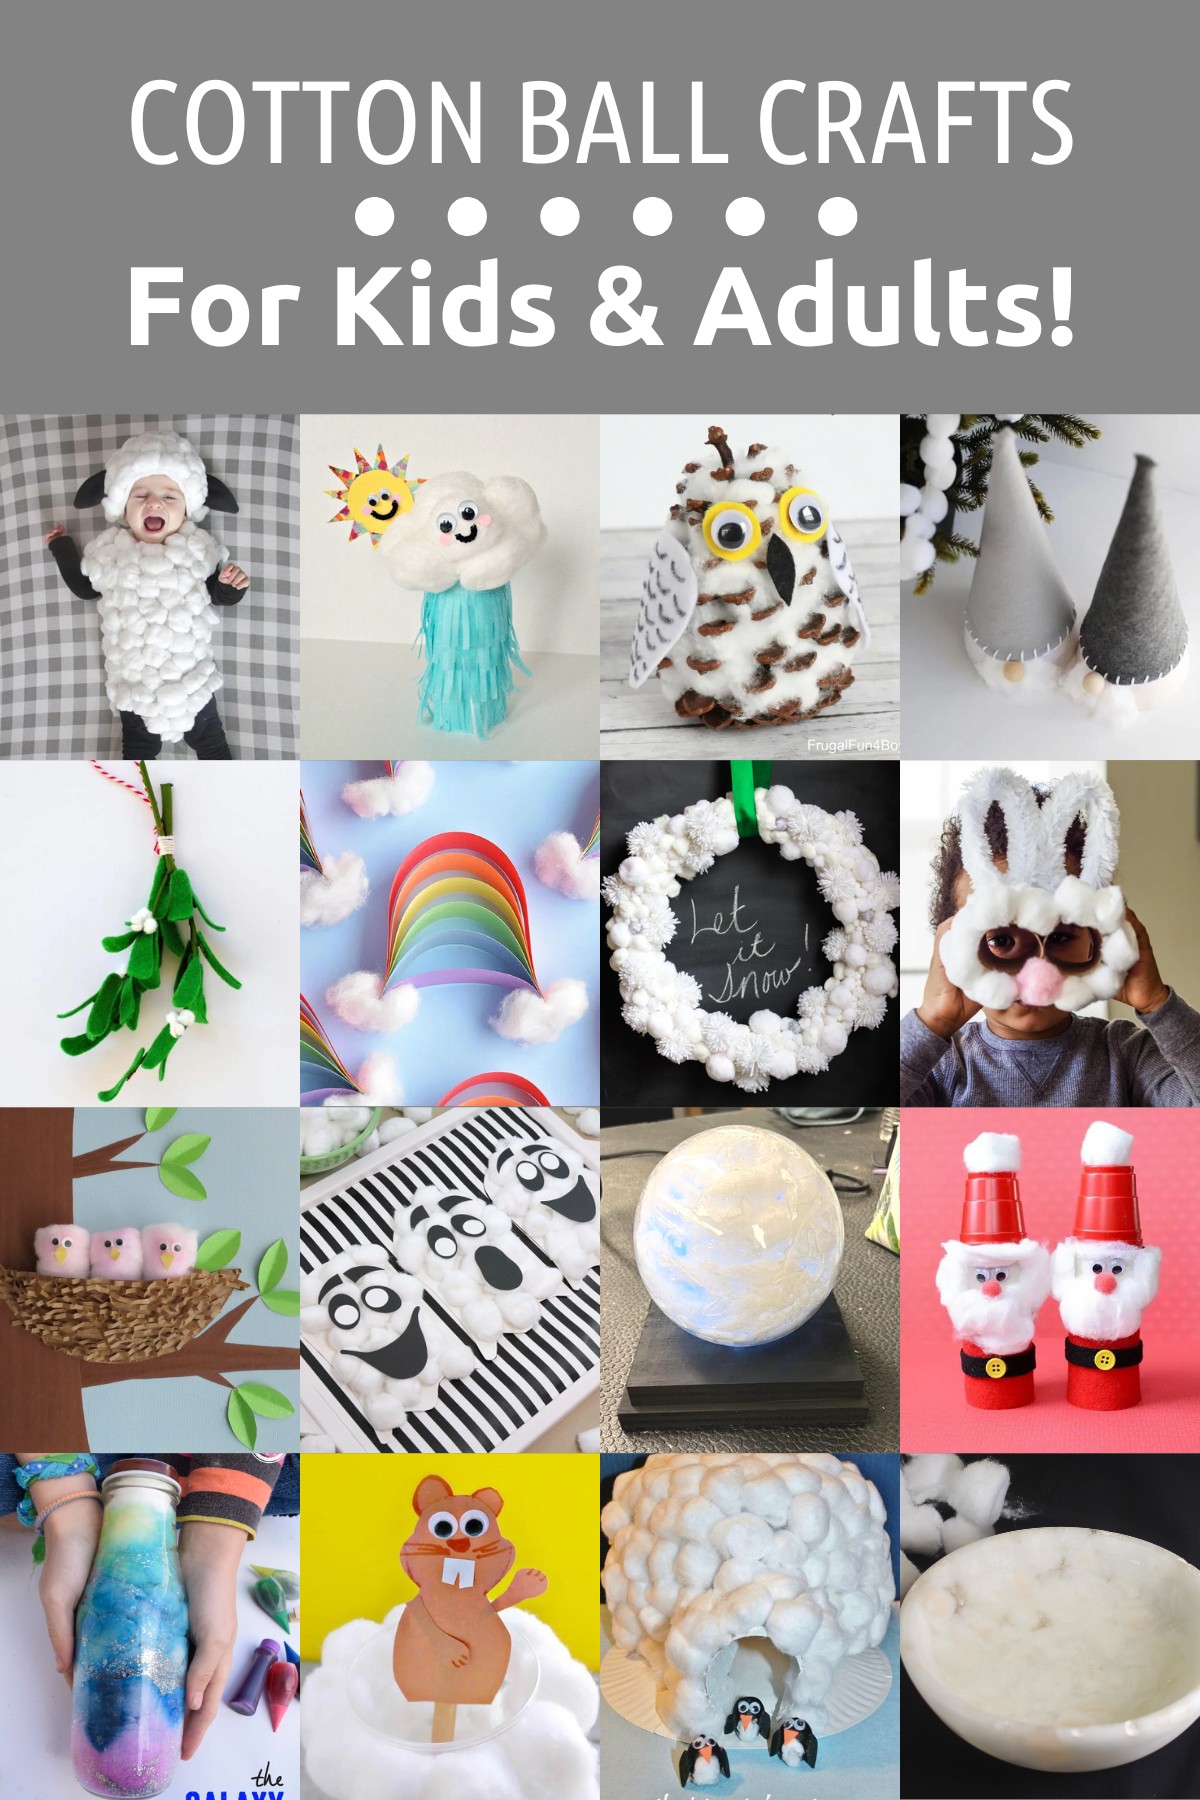 Crafts with Cotton Balls for Kids & Adults! - DIY Candy